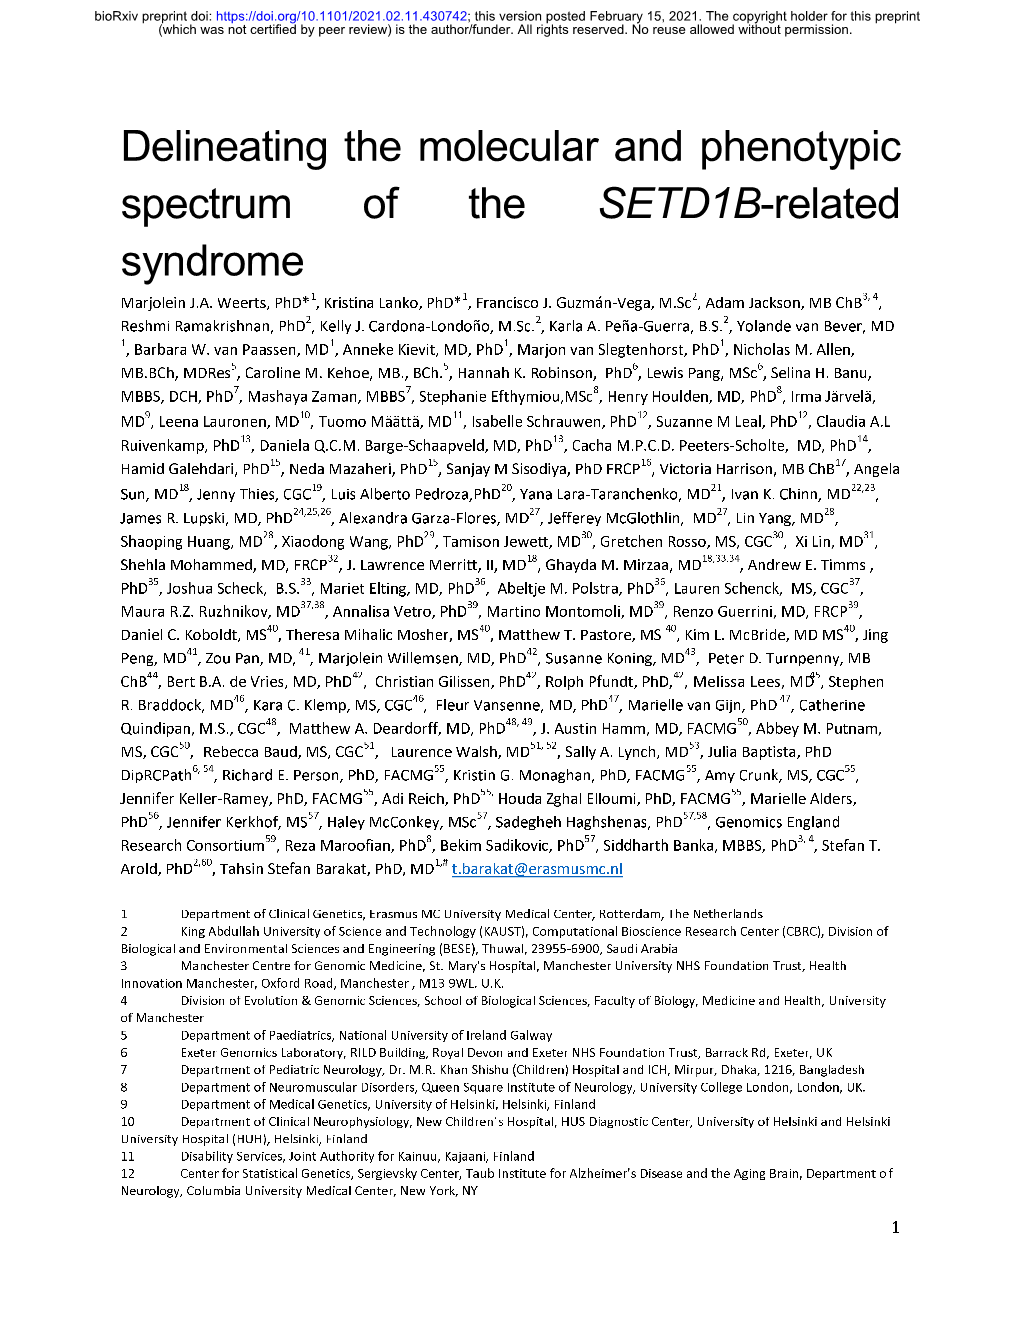 Delineating the Molecular and Phenotypic Spectrum of the SETD1B-Related Syndrome Marjolein J.A